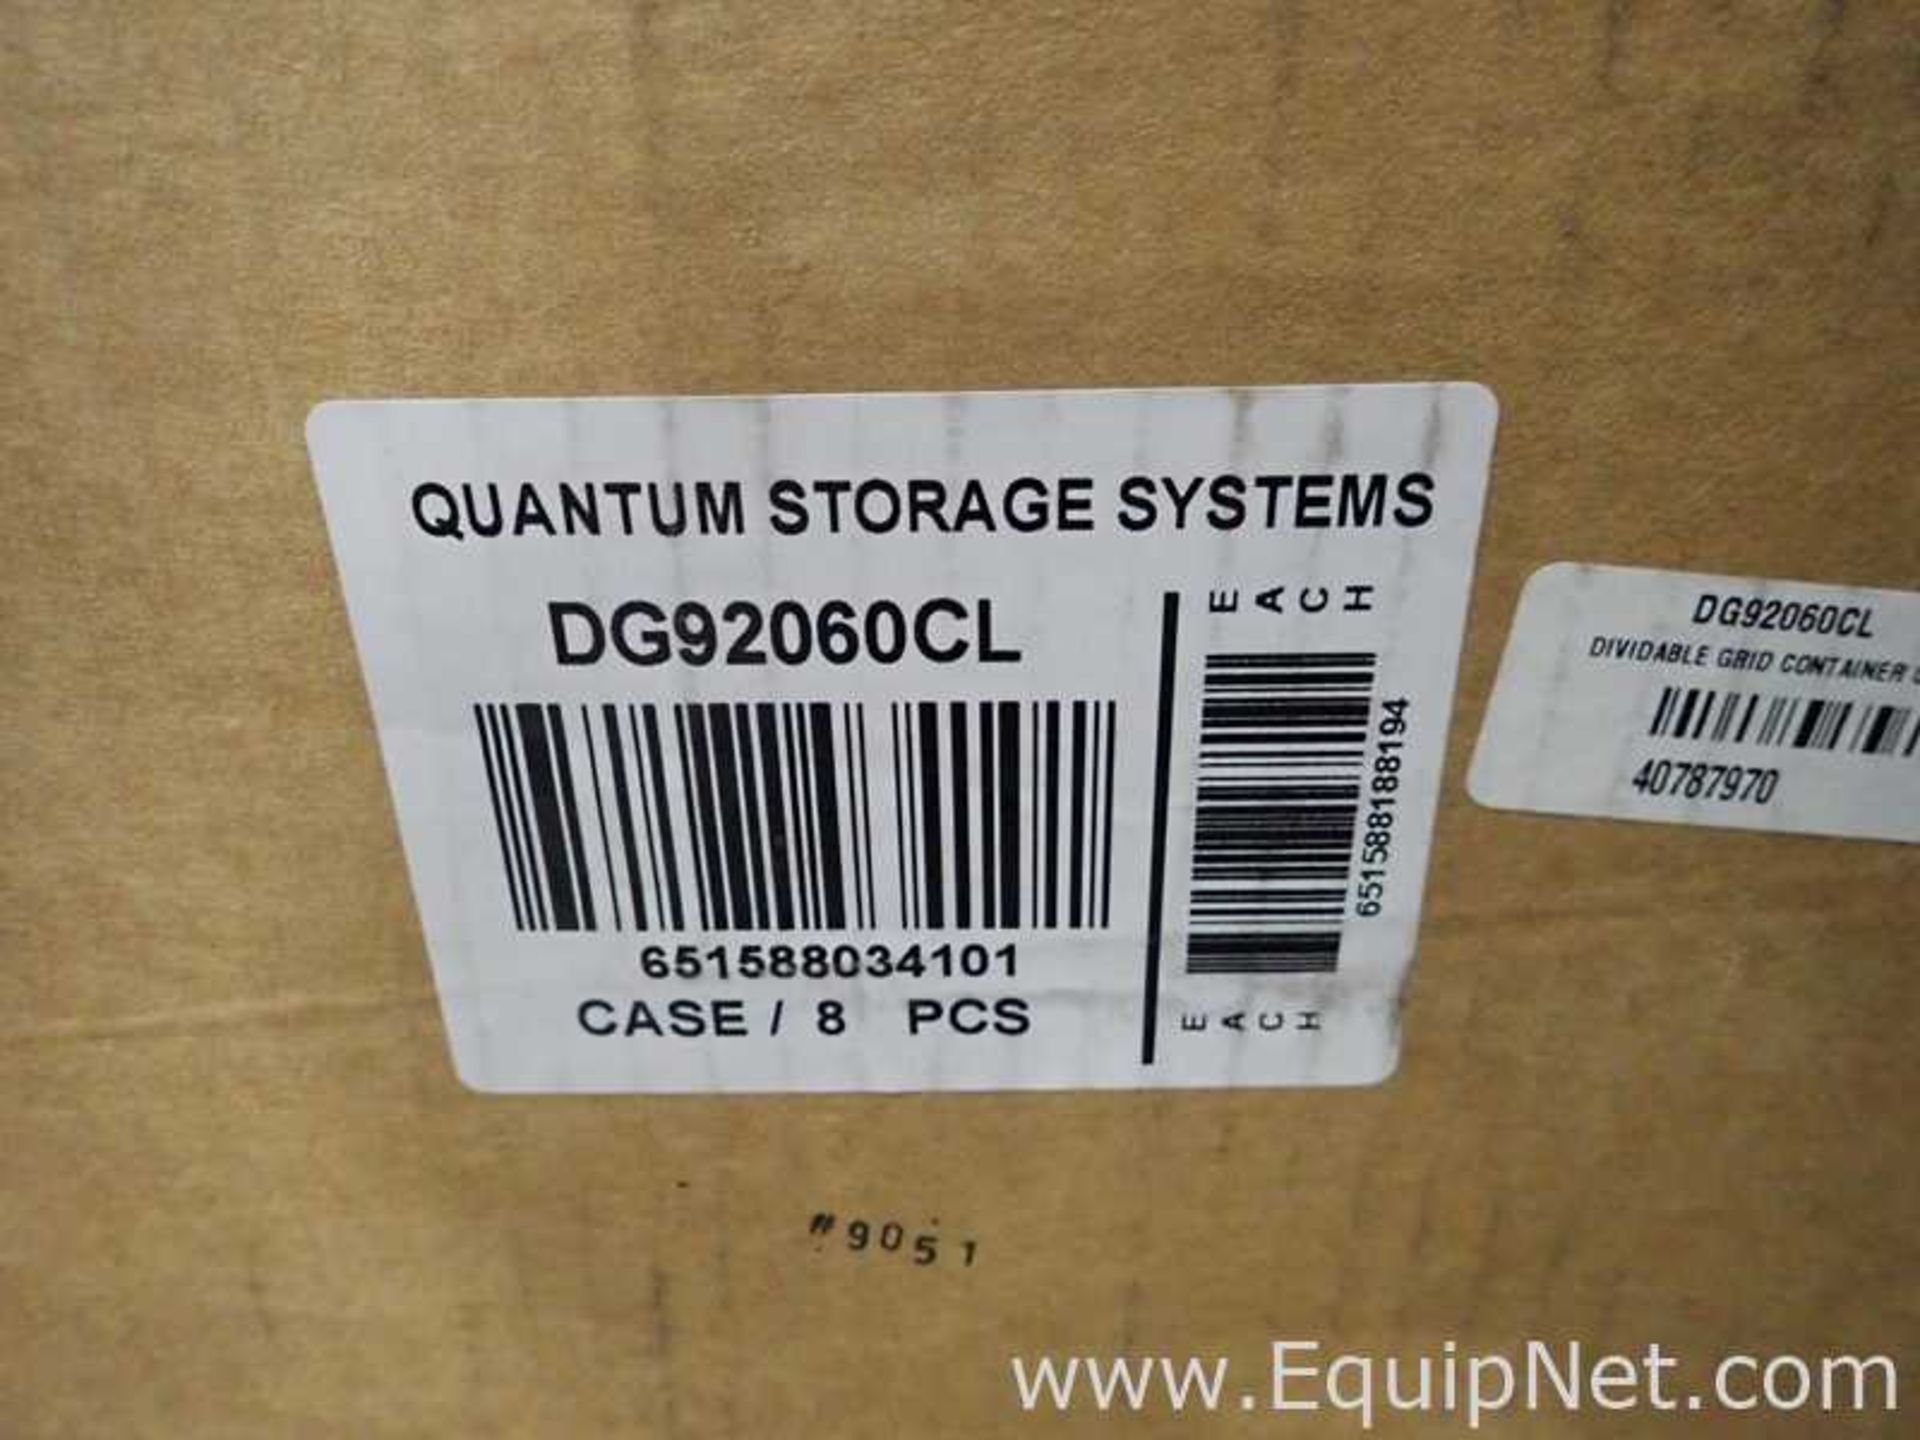 Lot of Approximately 55 Quantum Storage Systems DG92060CL Clear Dividable Grid Containers - Image 10 of 10